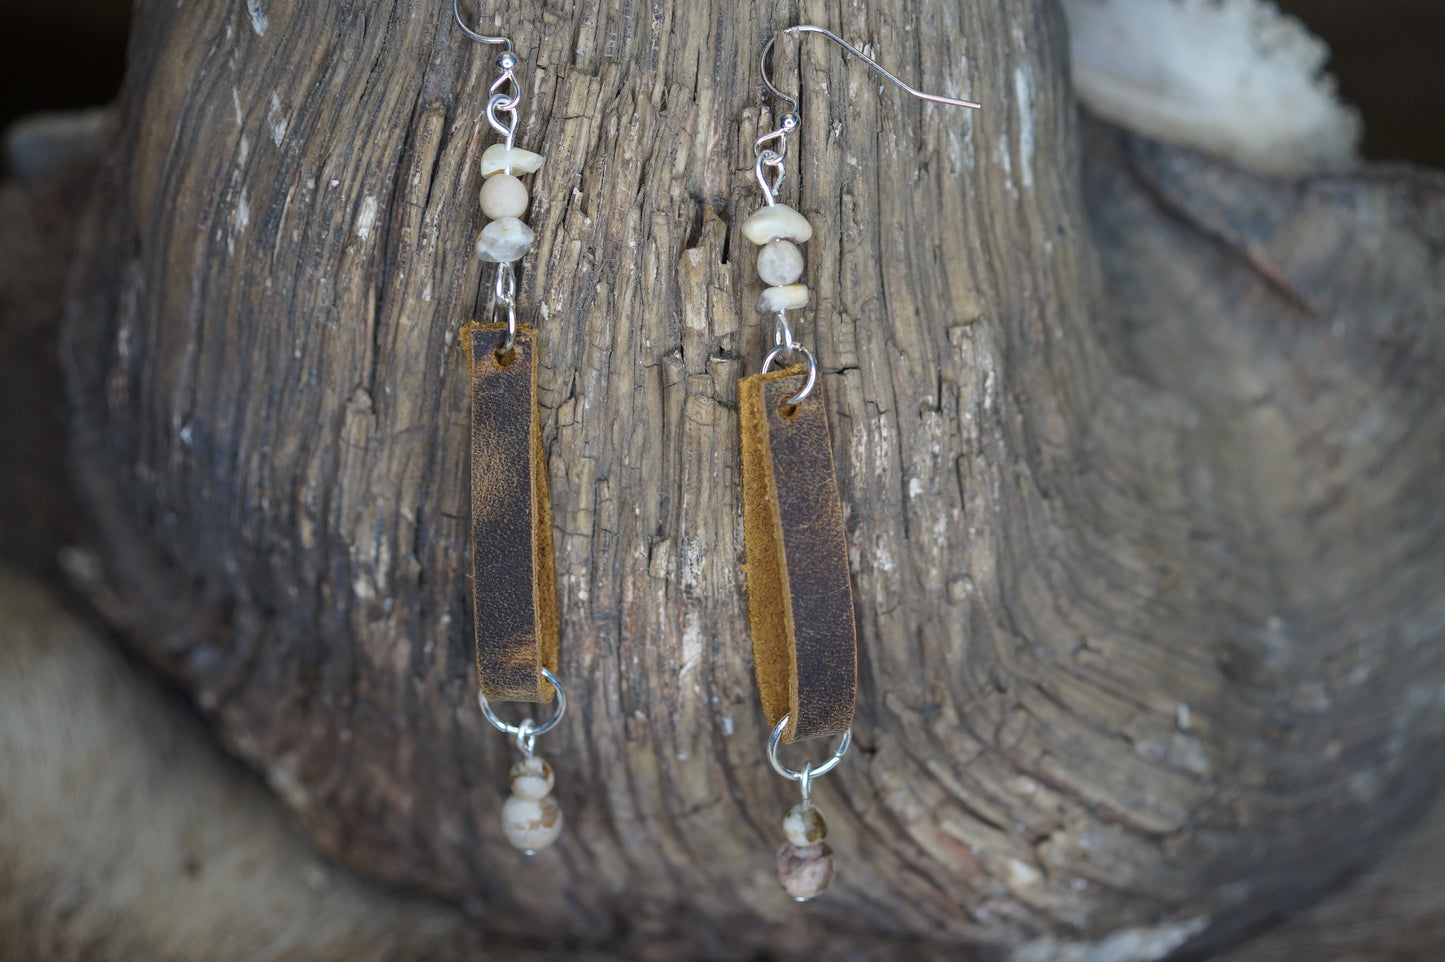 Rustic leather and beads earrings